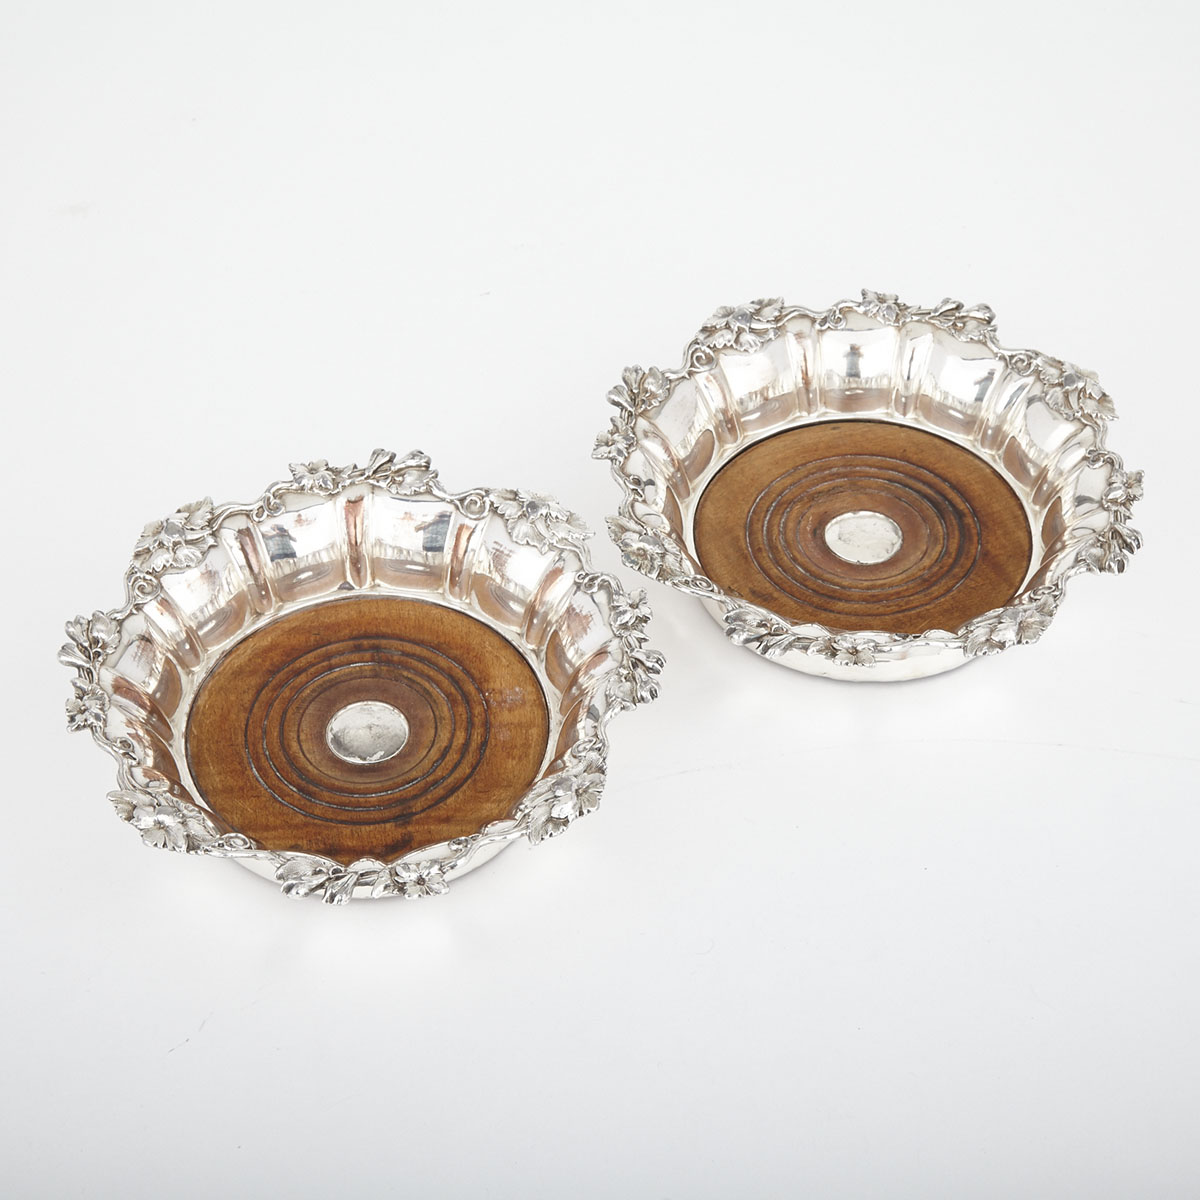 Pair of Old Sheffield Plate Wine Coasters, c.1830